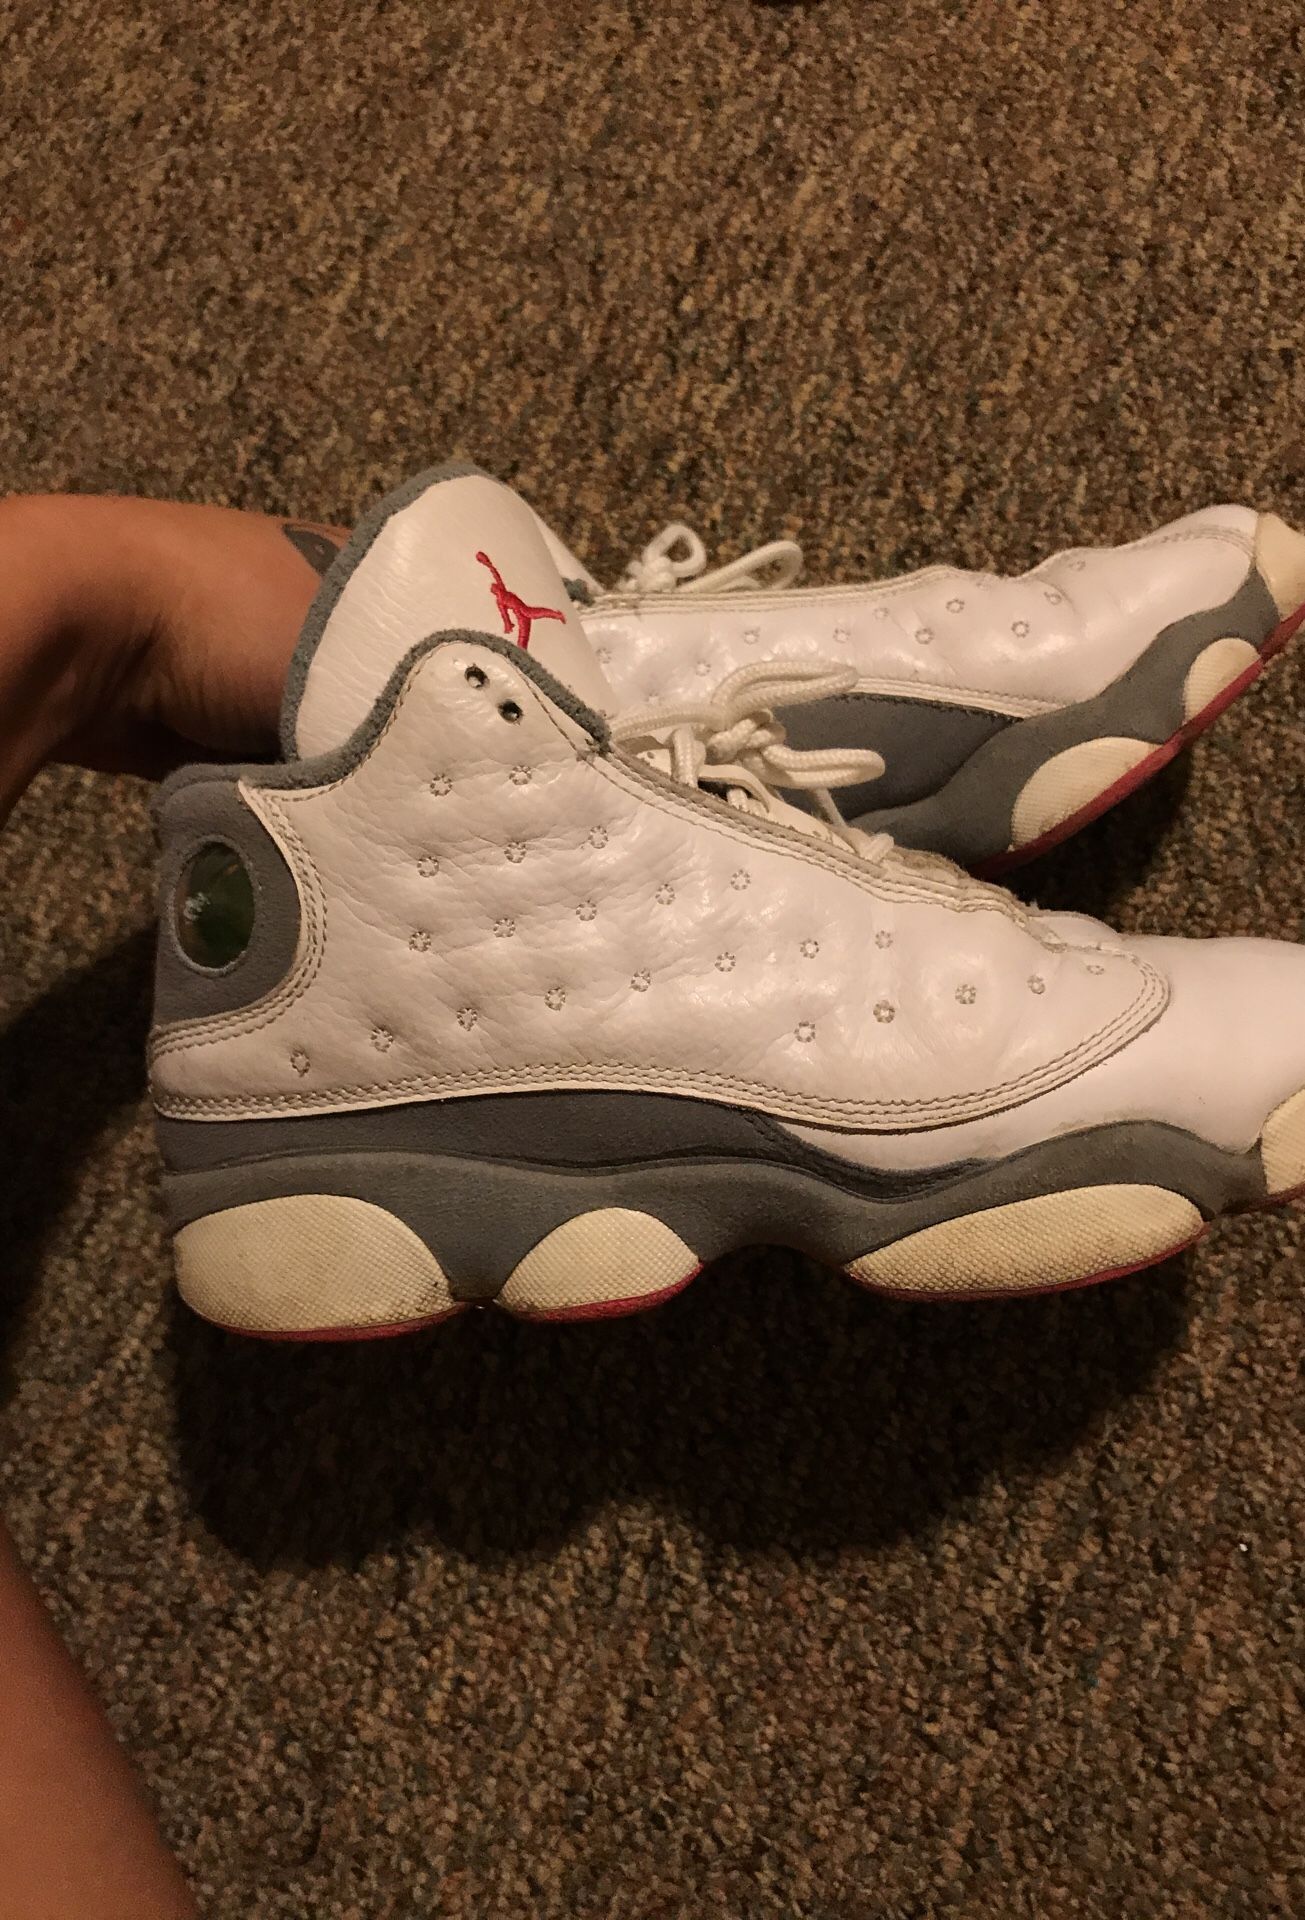 White and grey / pink Jordan 13s size 6.5 y